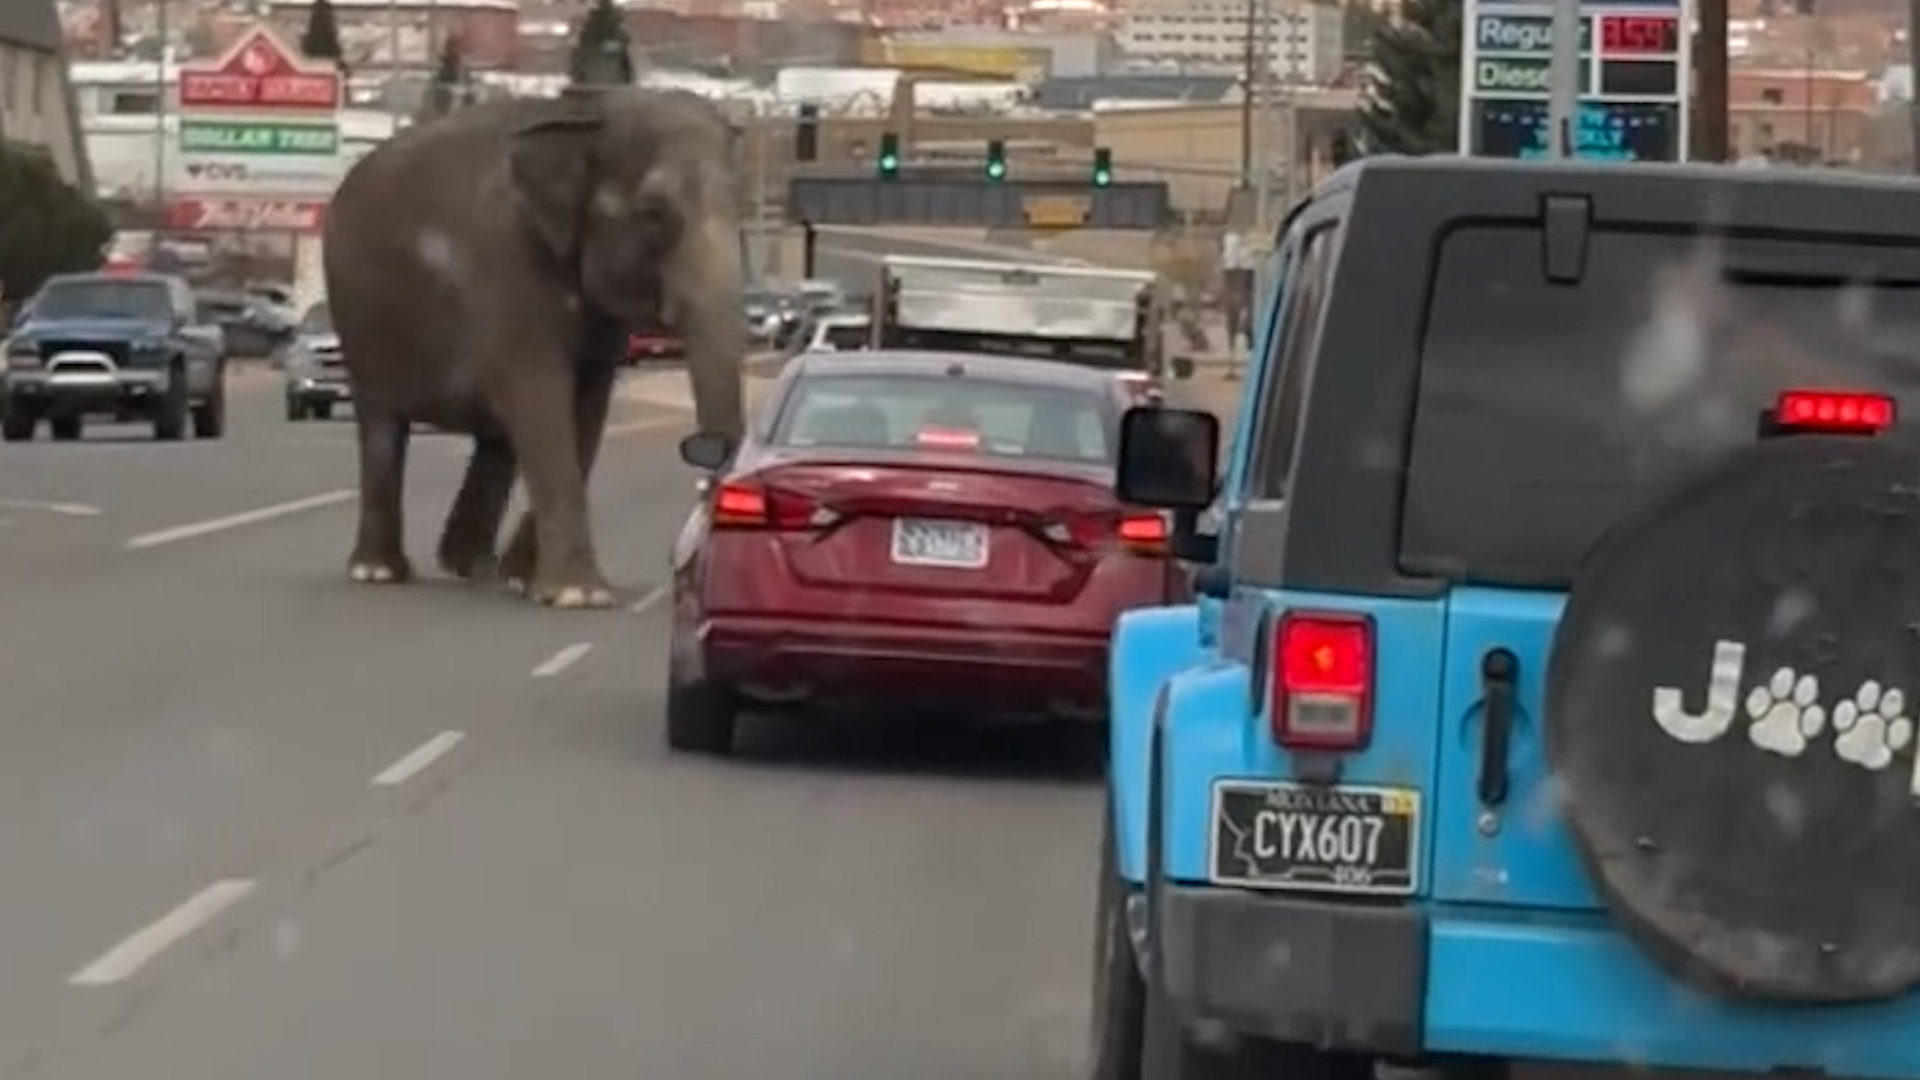 Elephant runs amok after escaping circus for third time